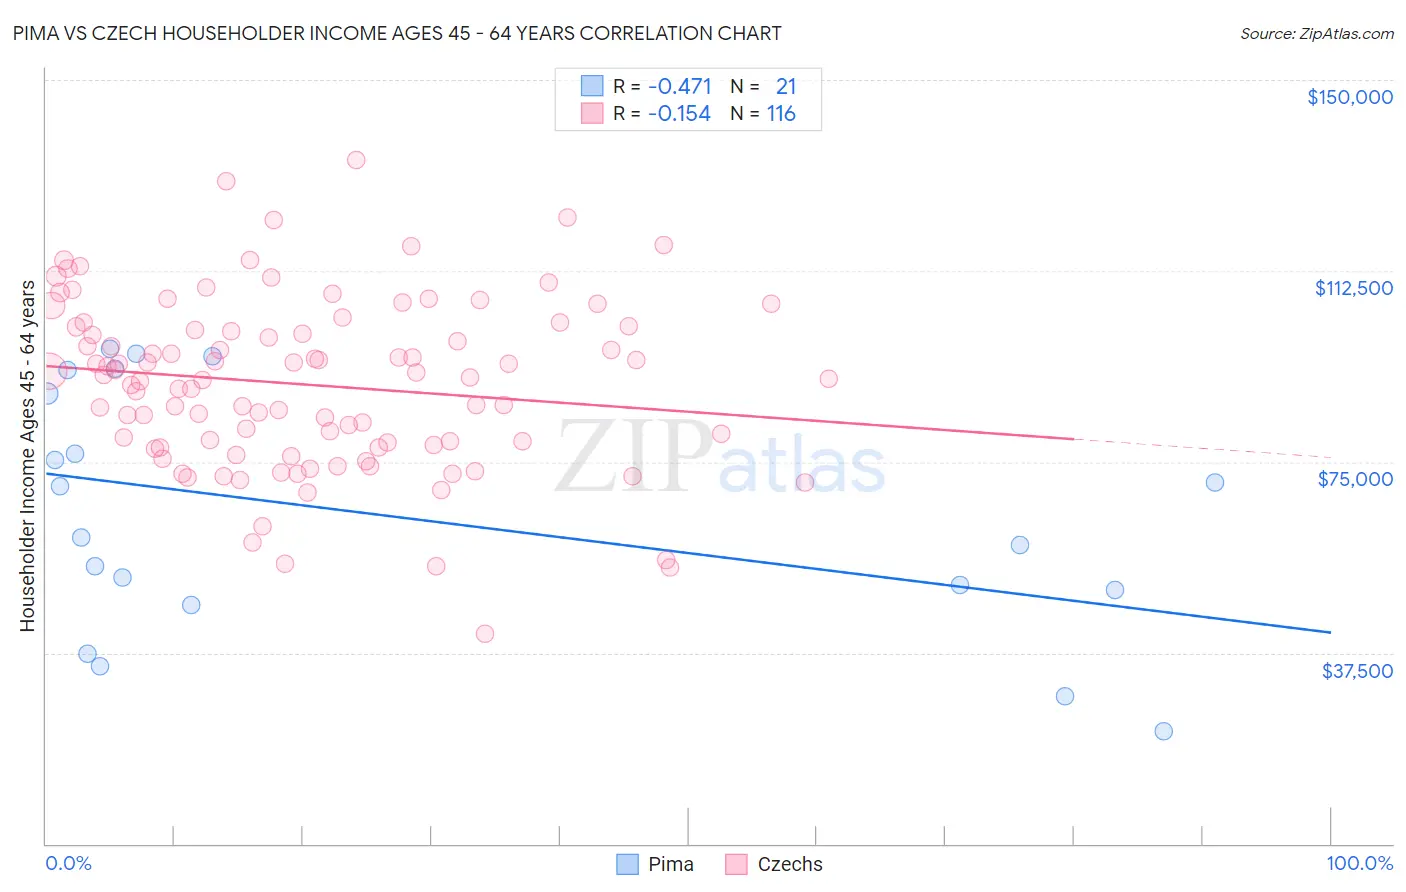 Pima vs Czech Householder Income Ages 45 - 64 years